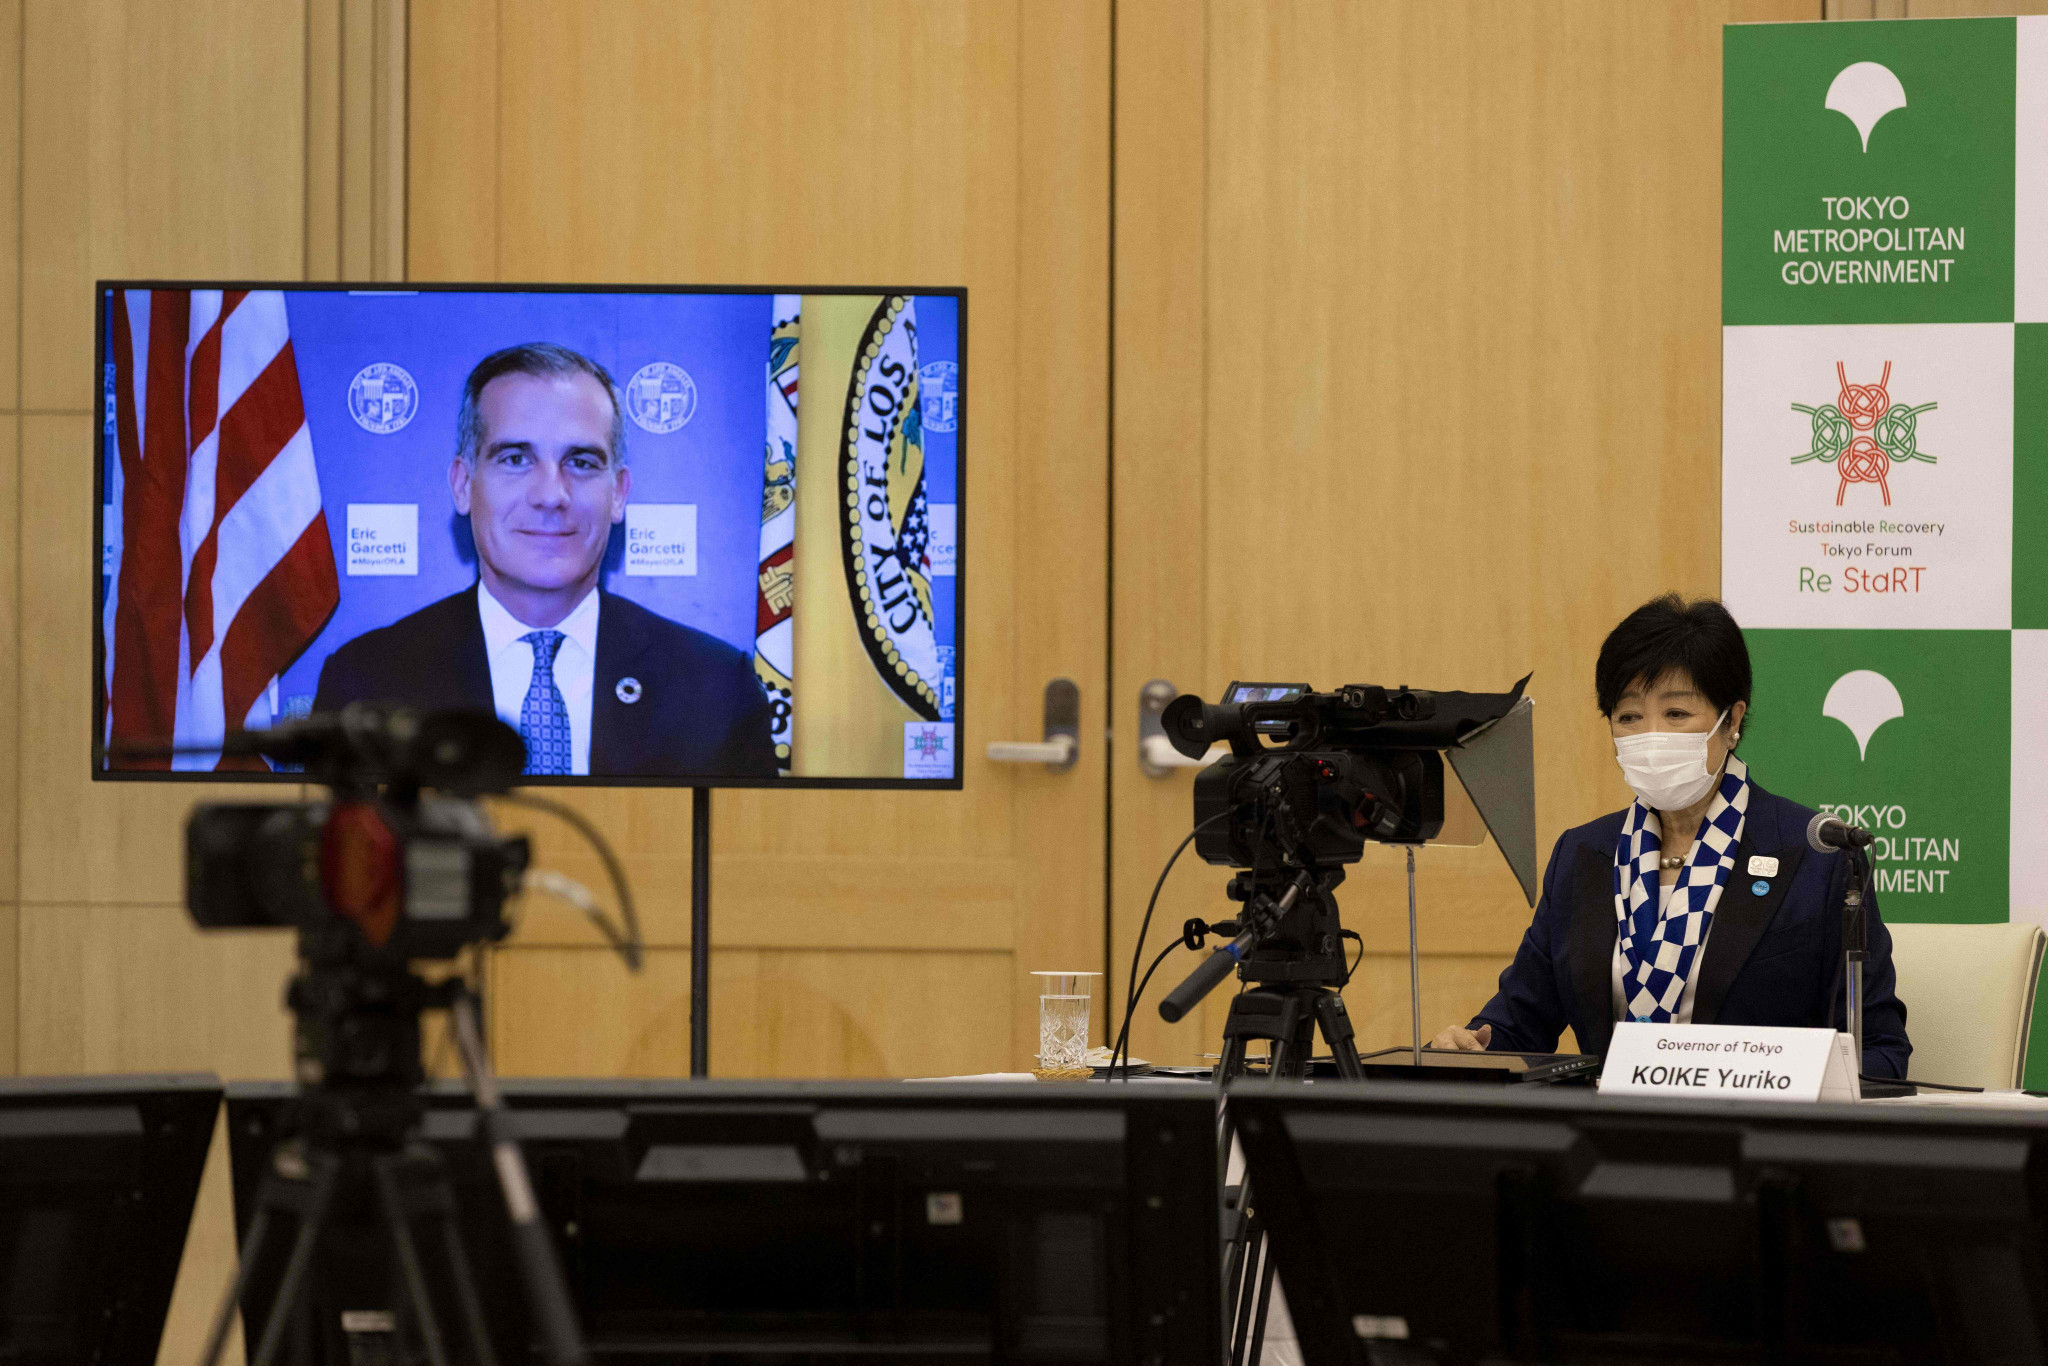 Los Angeles Mayor Eric Garcetti believes Olympic host cities can deliver bold actions ©Getty Images